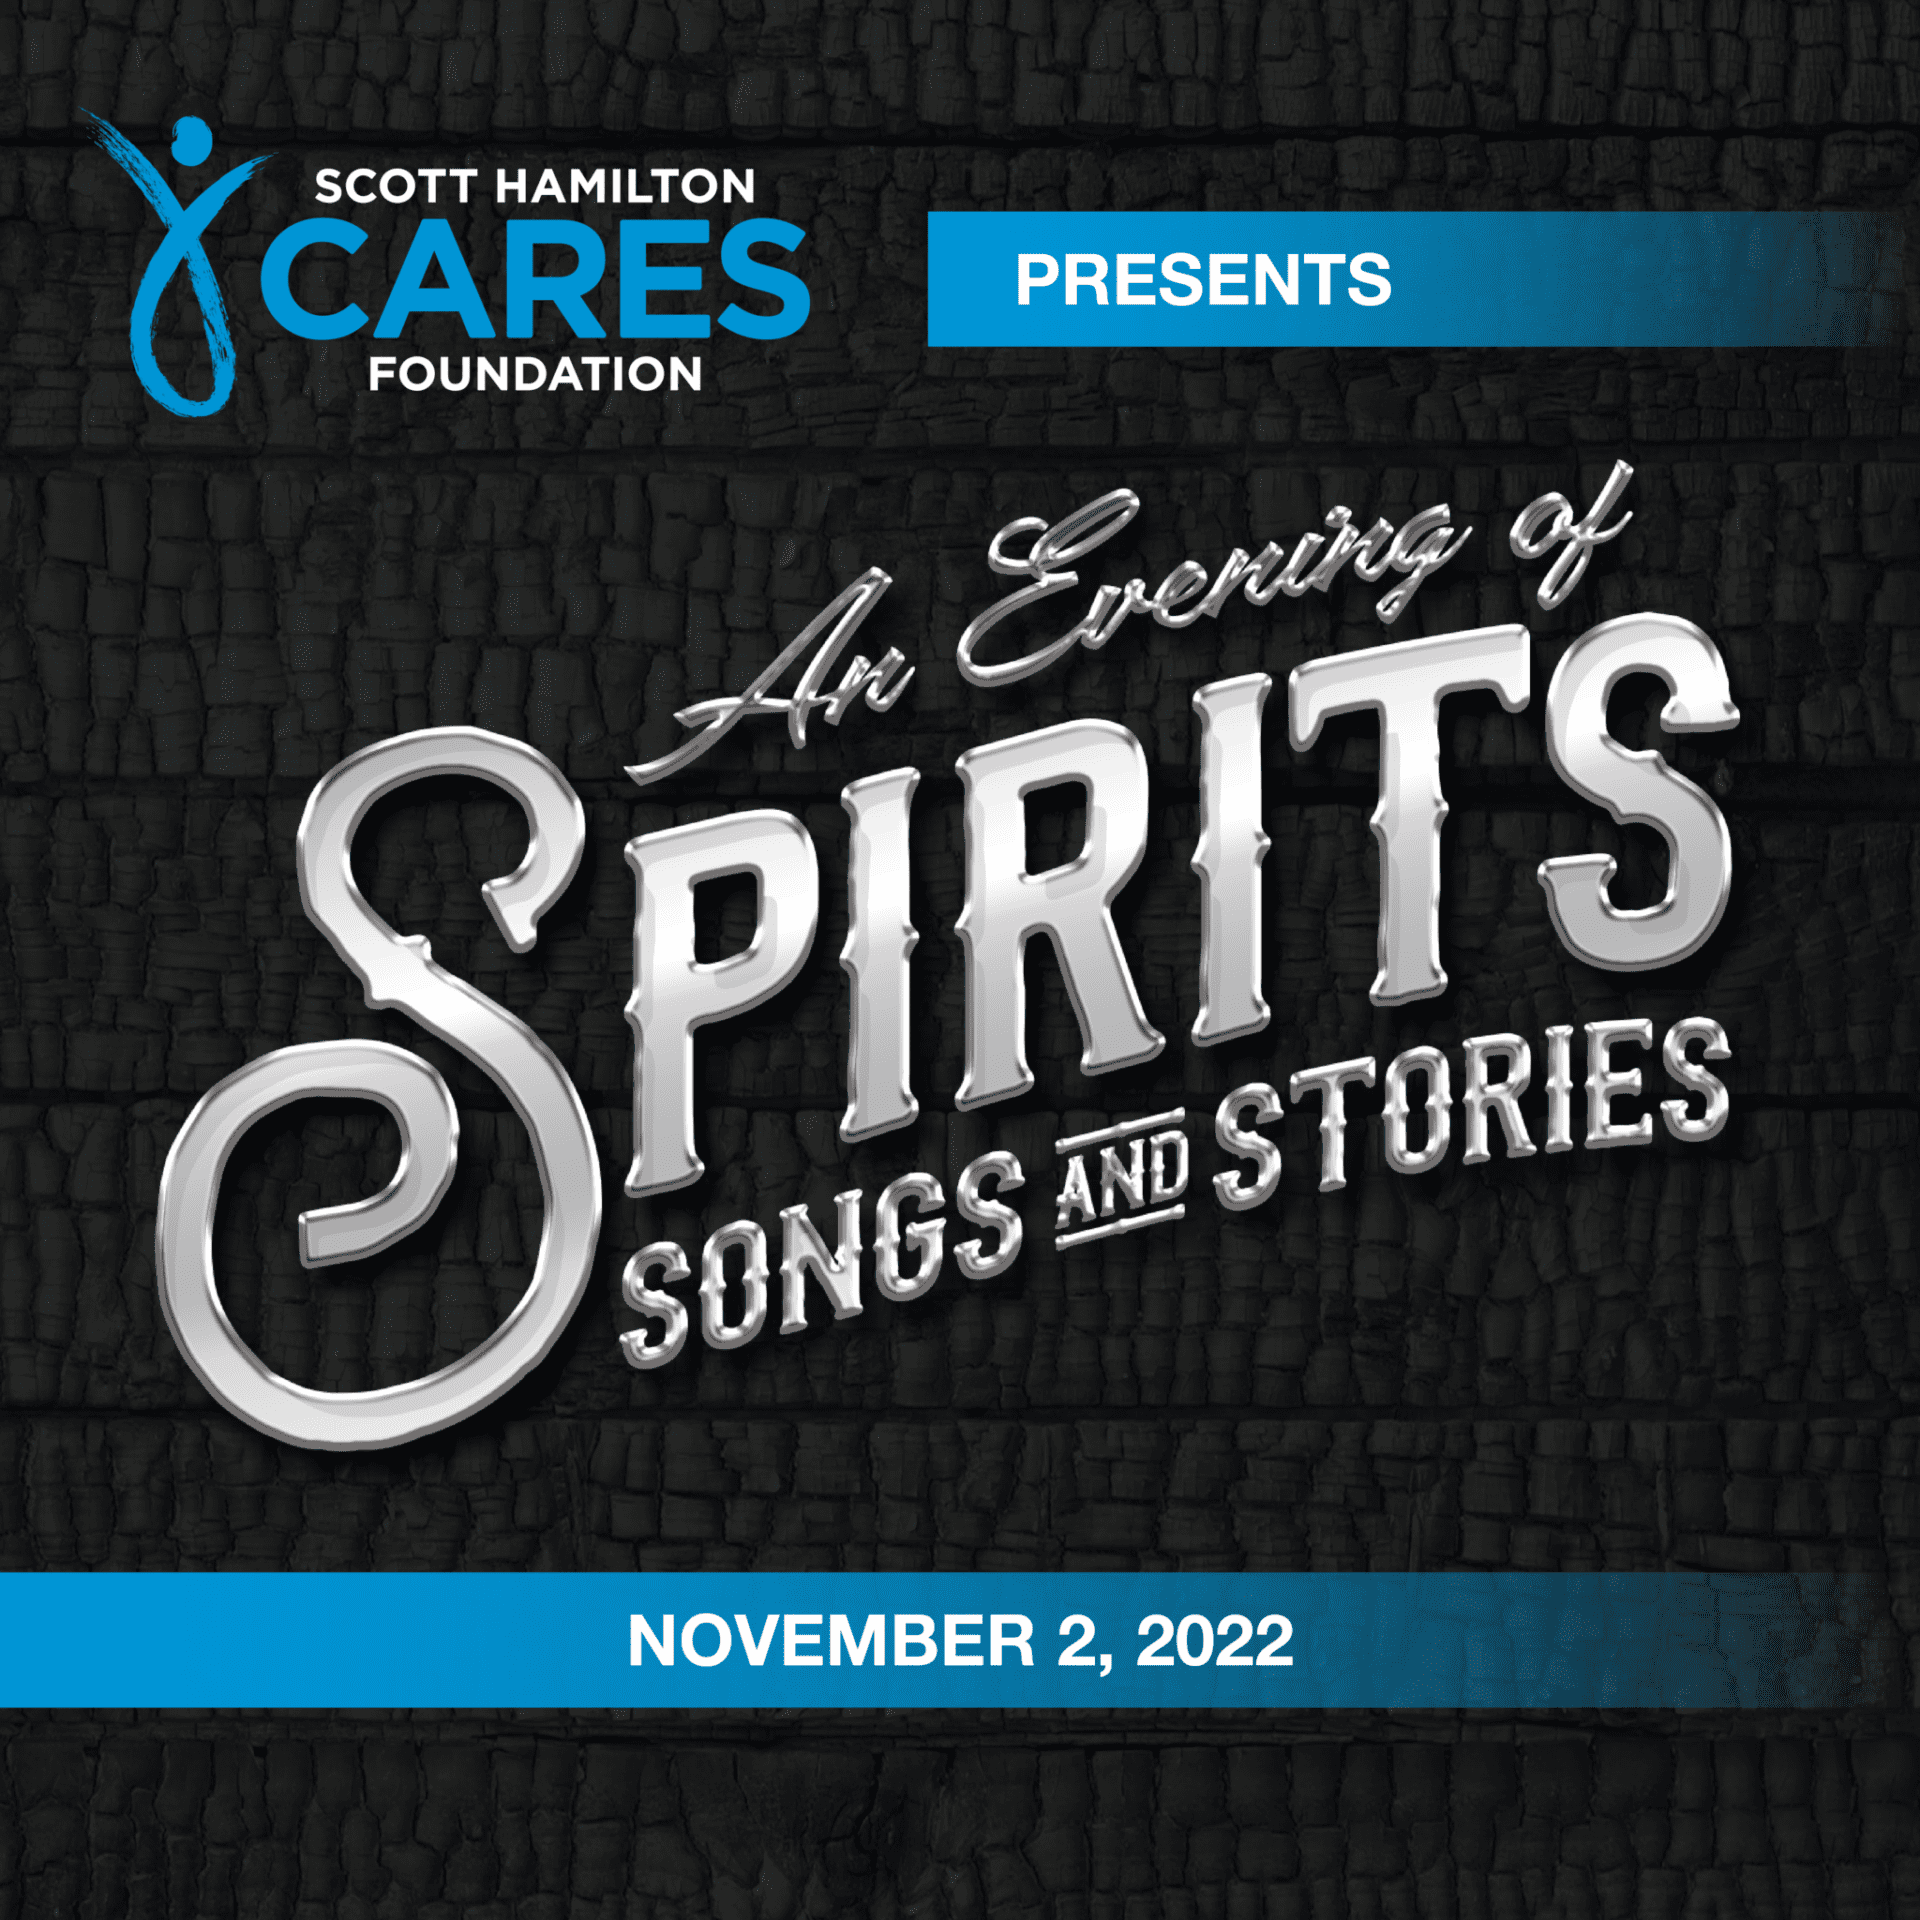 AN EVENING OF SPIRITS, SONGS AND STORIES.